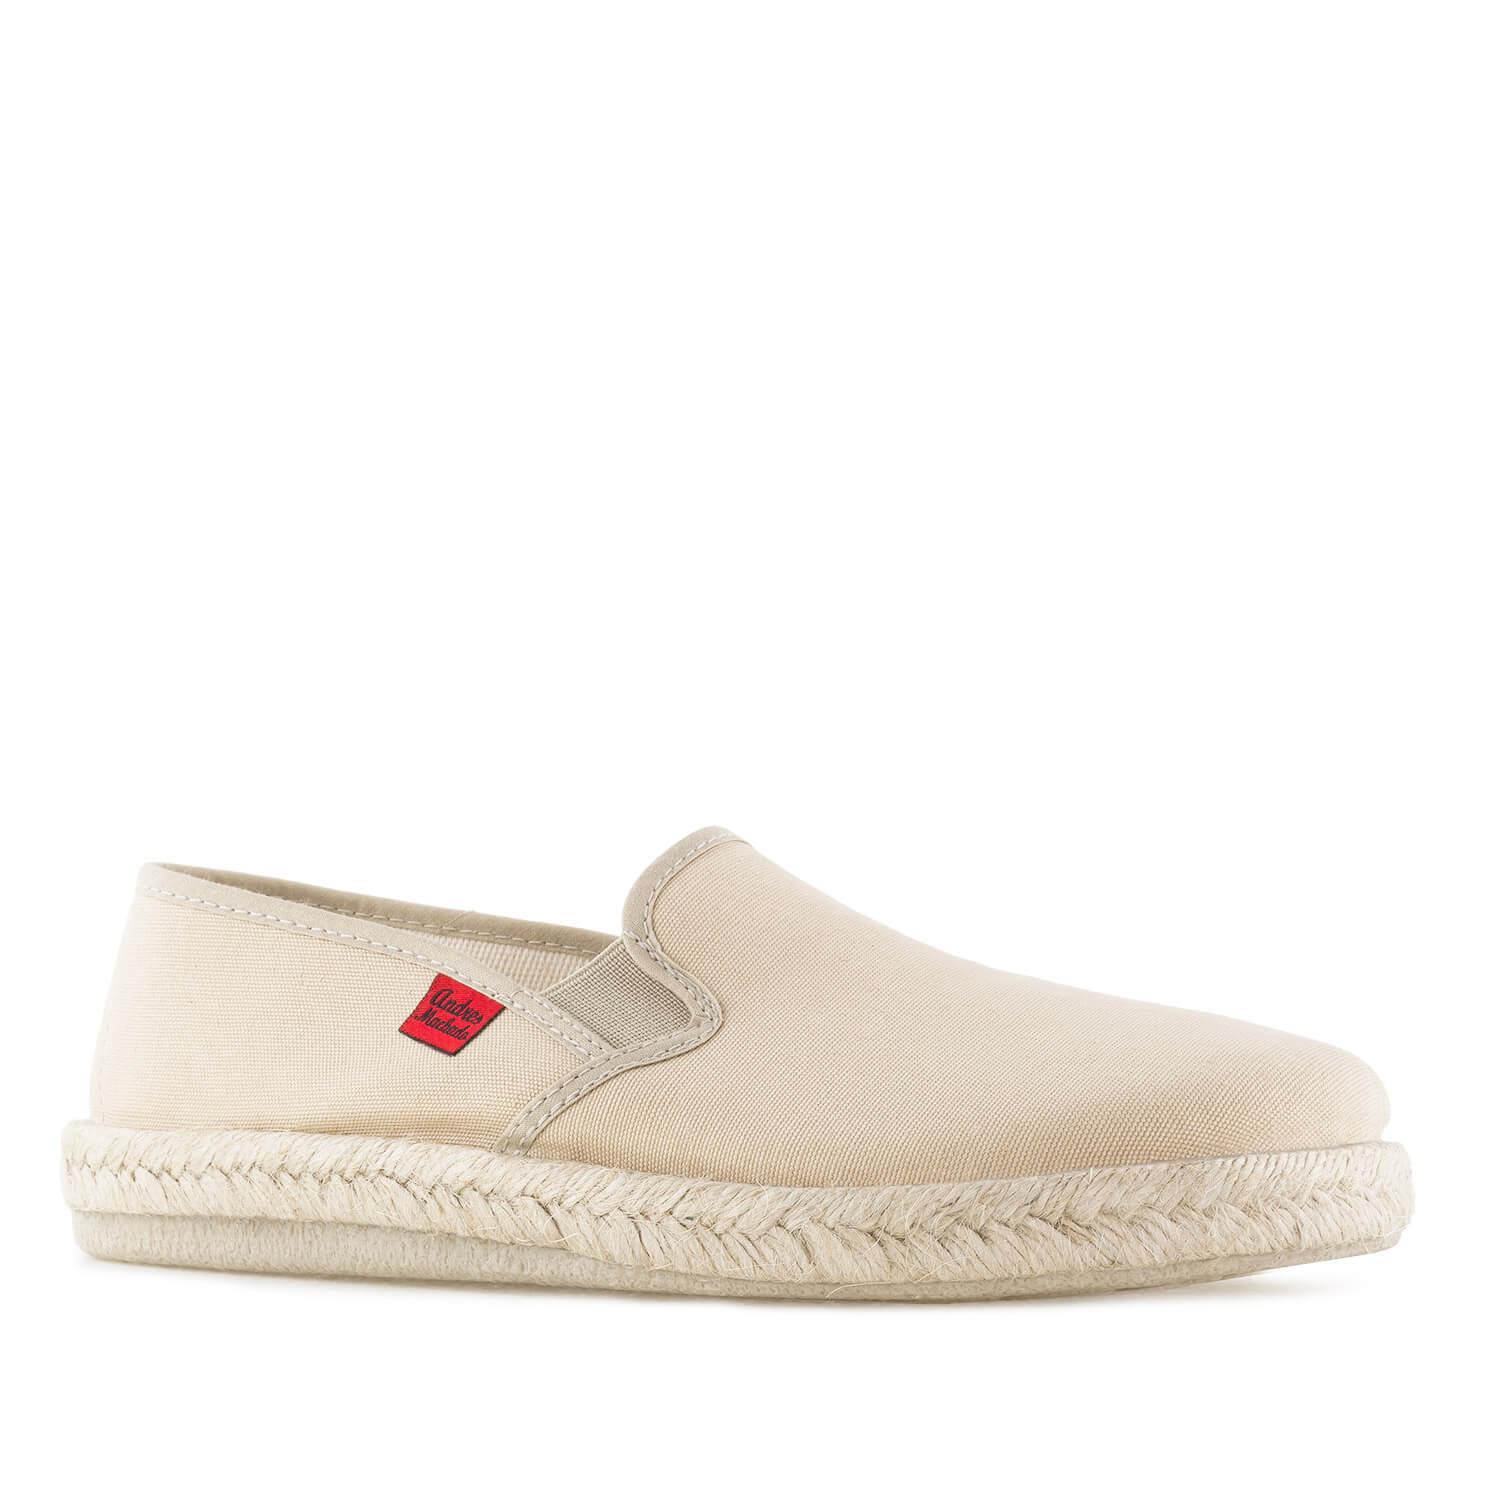 Mythical Beige Canvas Slip-on Shoes with Rubber and Jute Sole 